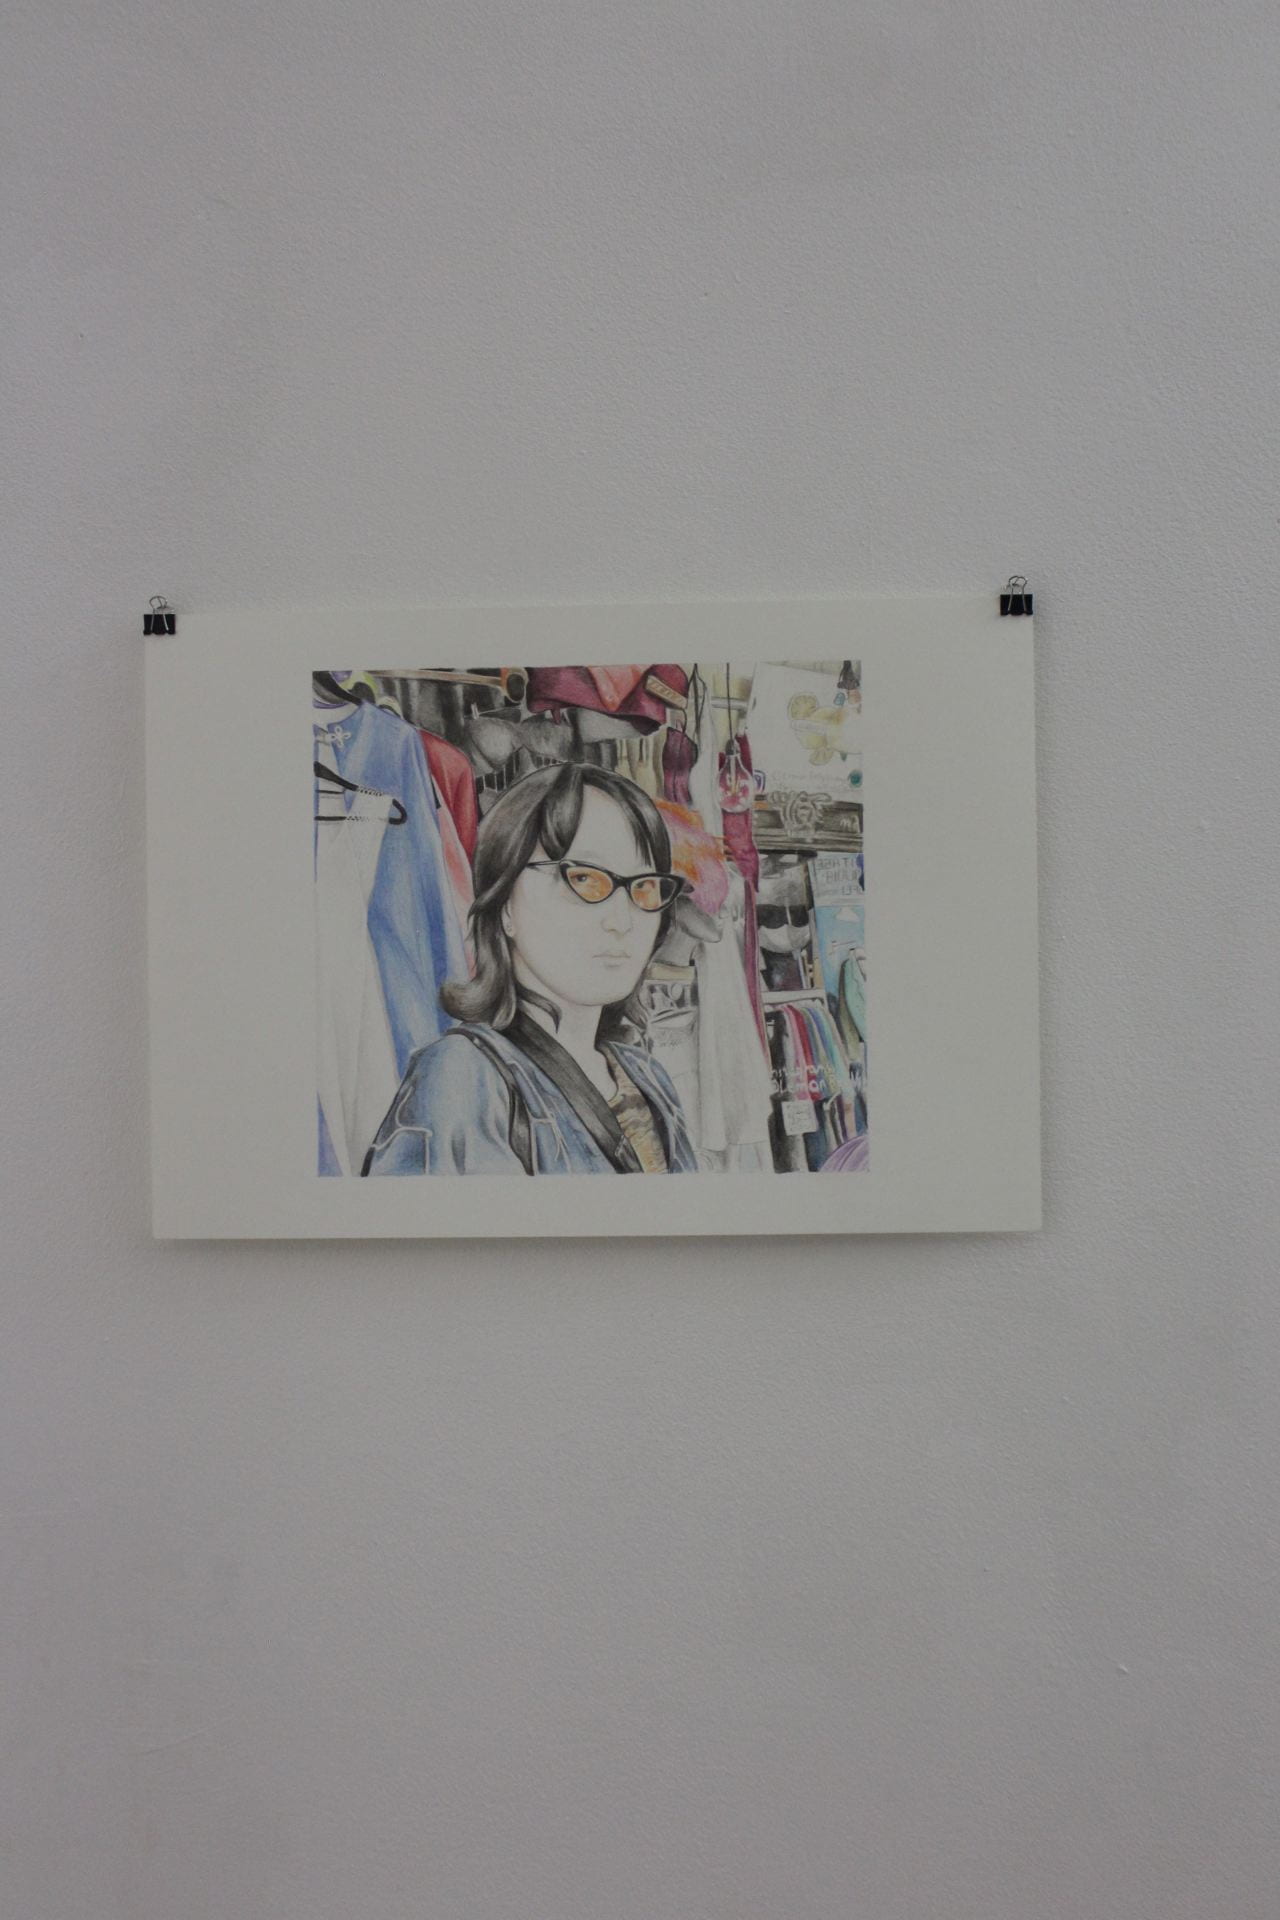 An image of a coloured pencil drawing of a person on a white wall.